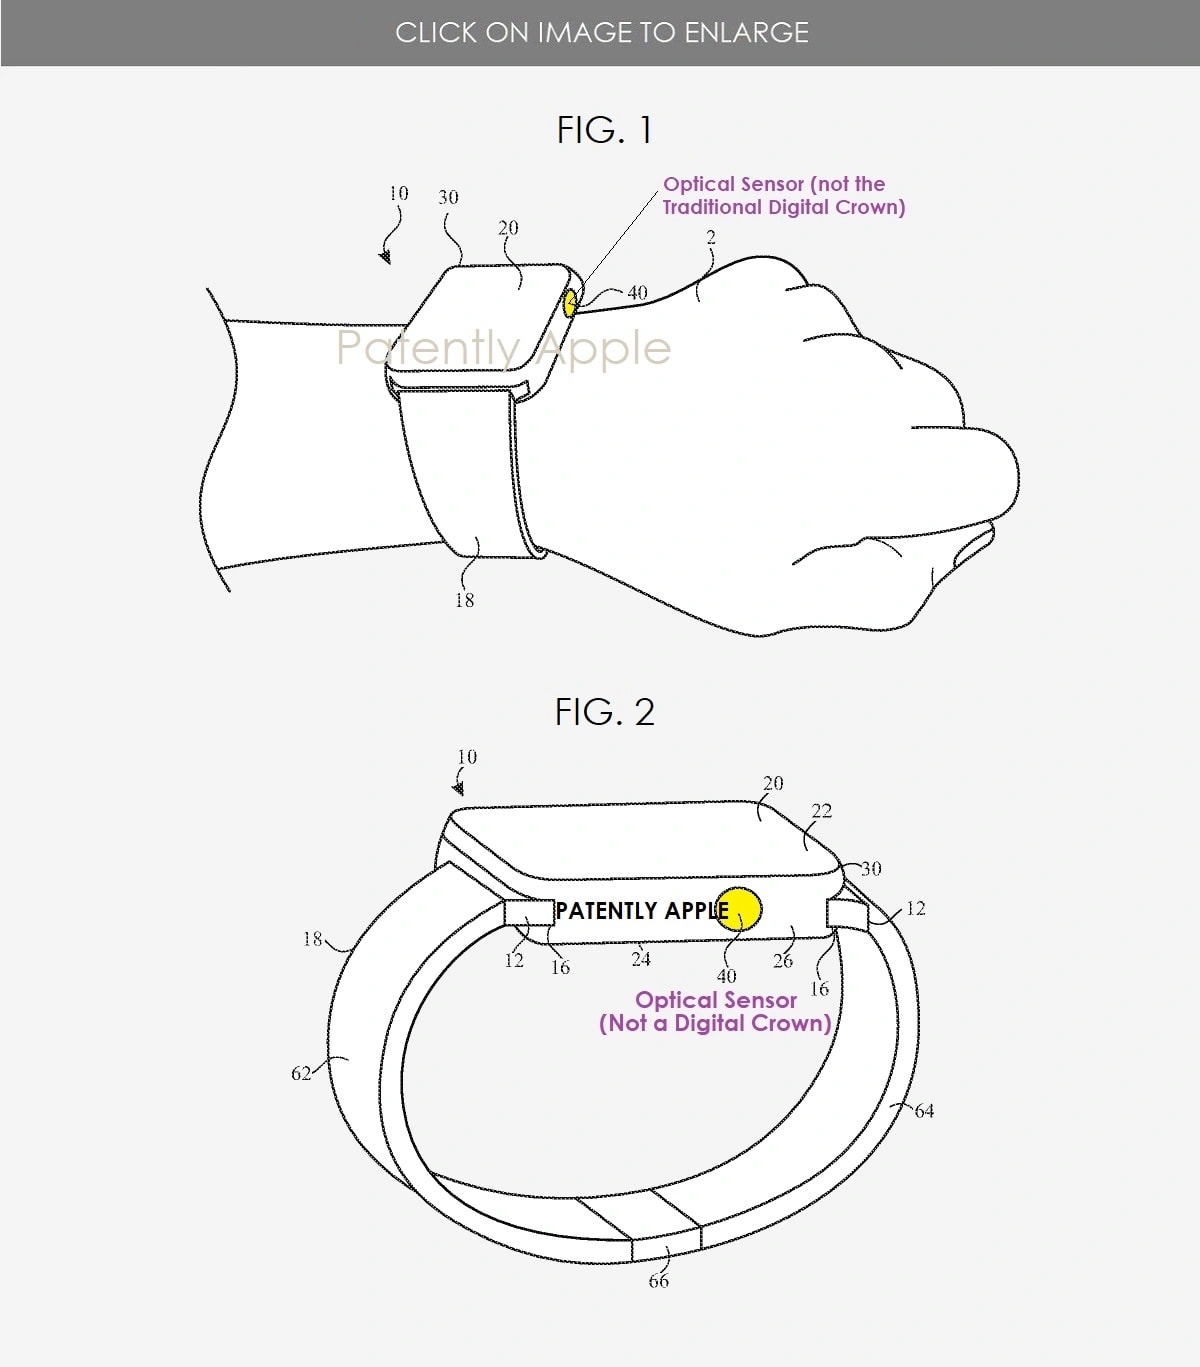 Look, ma, no Digital Crown. An image from the patent shows optical sensors replacing it.